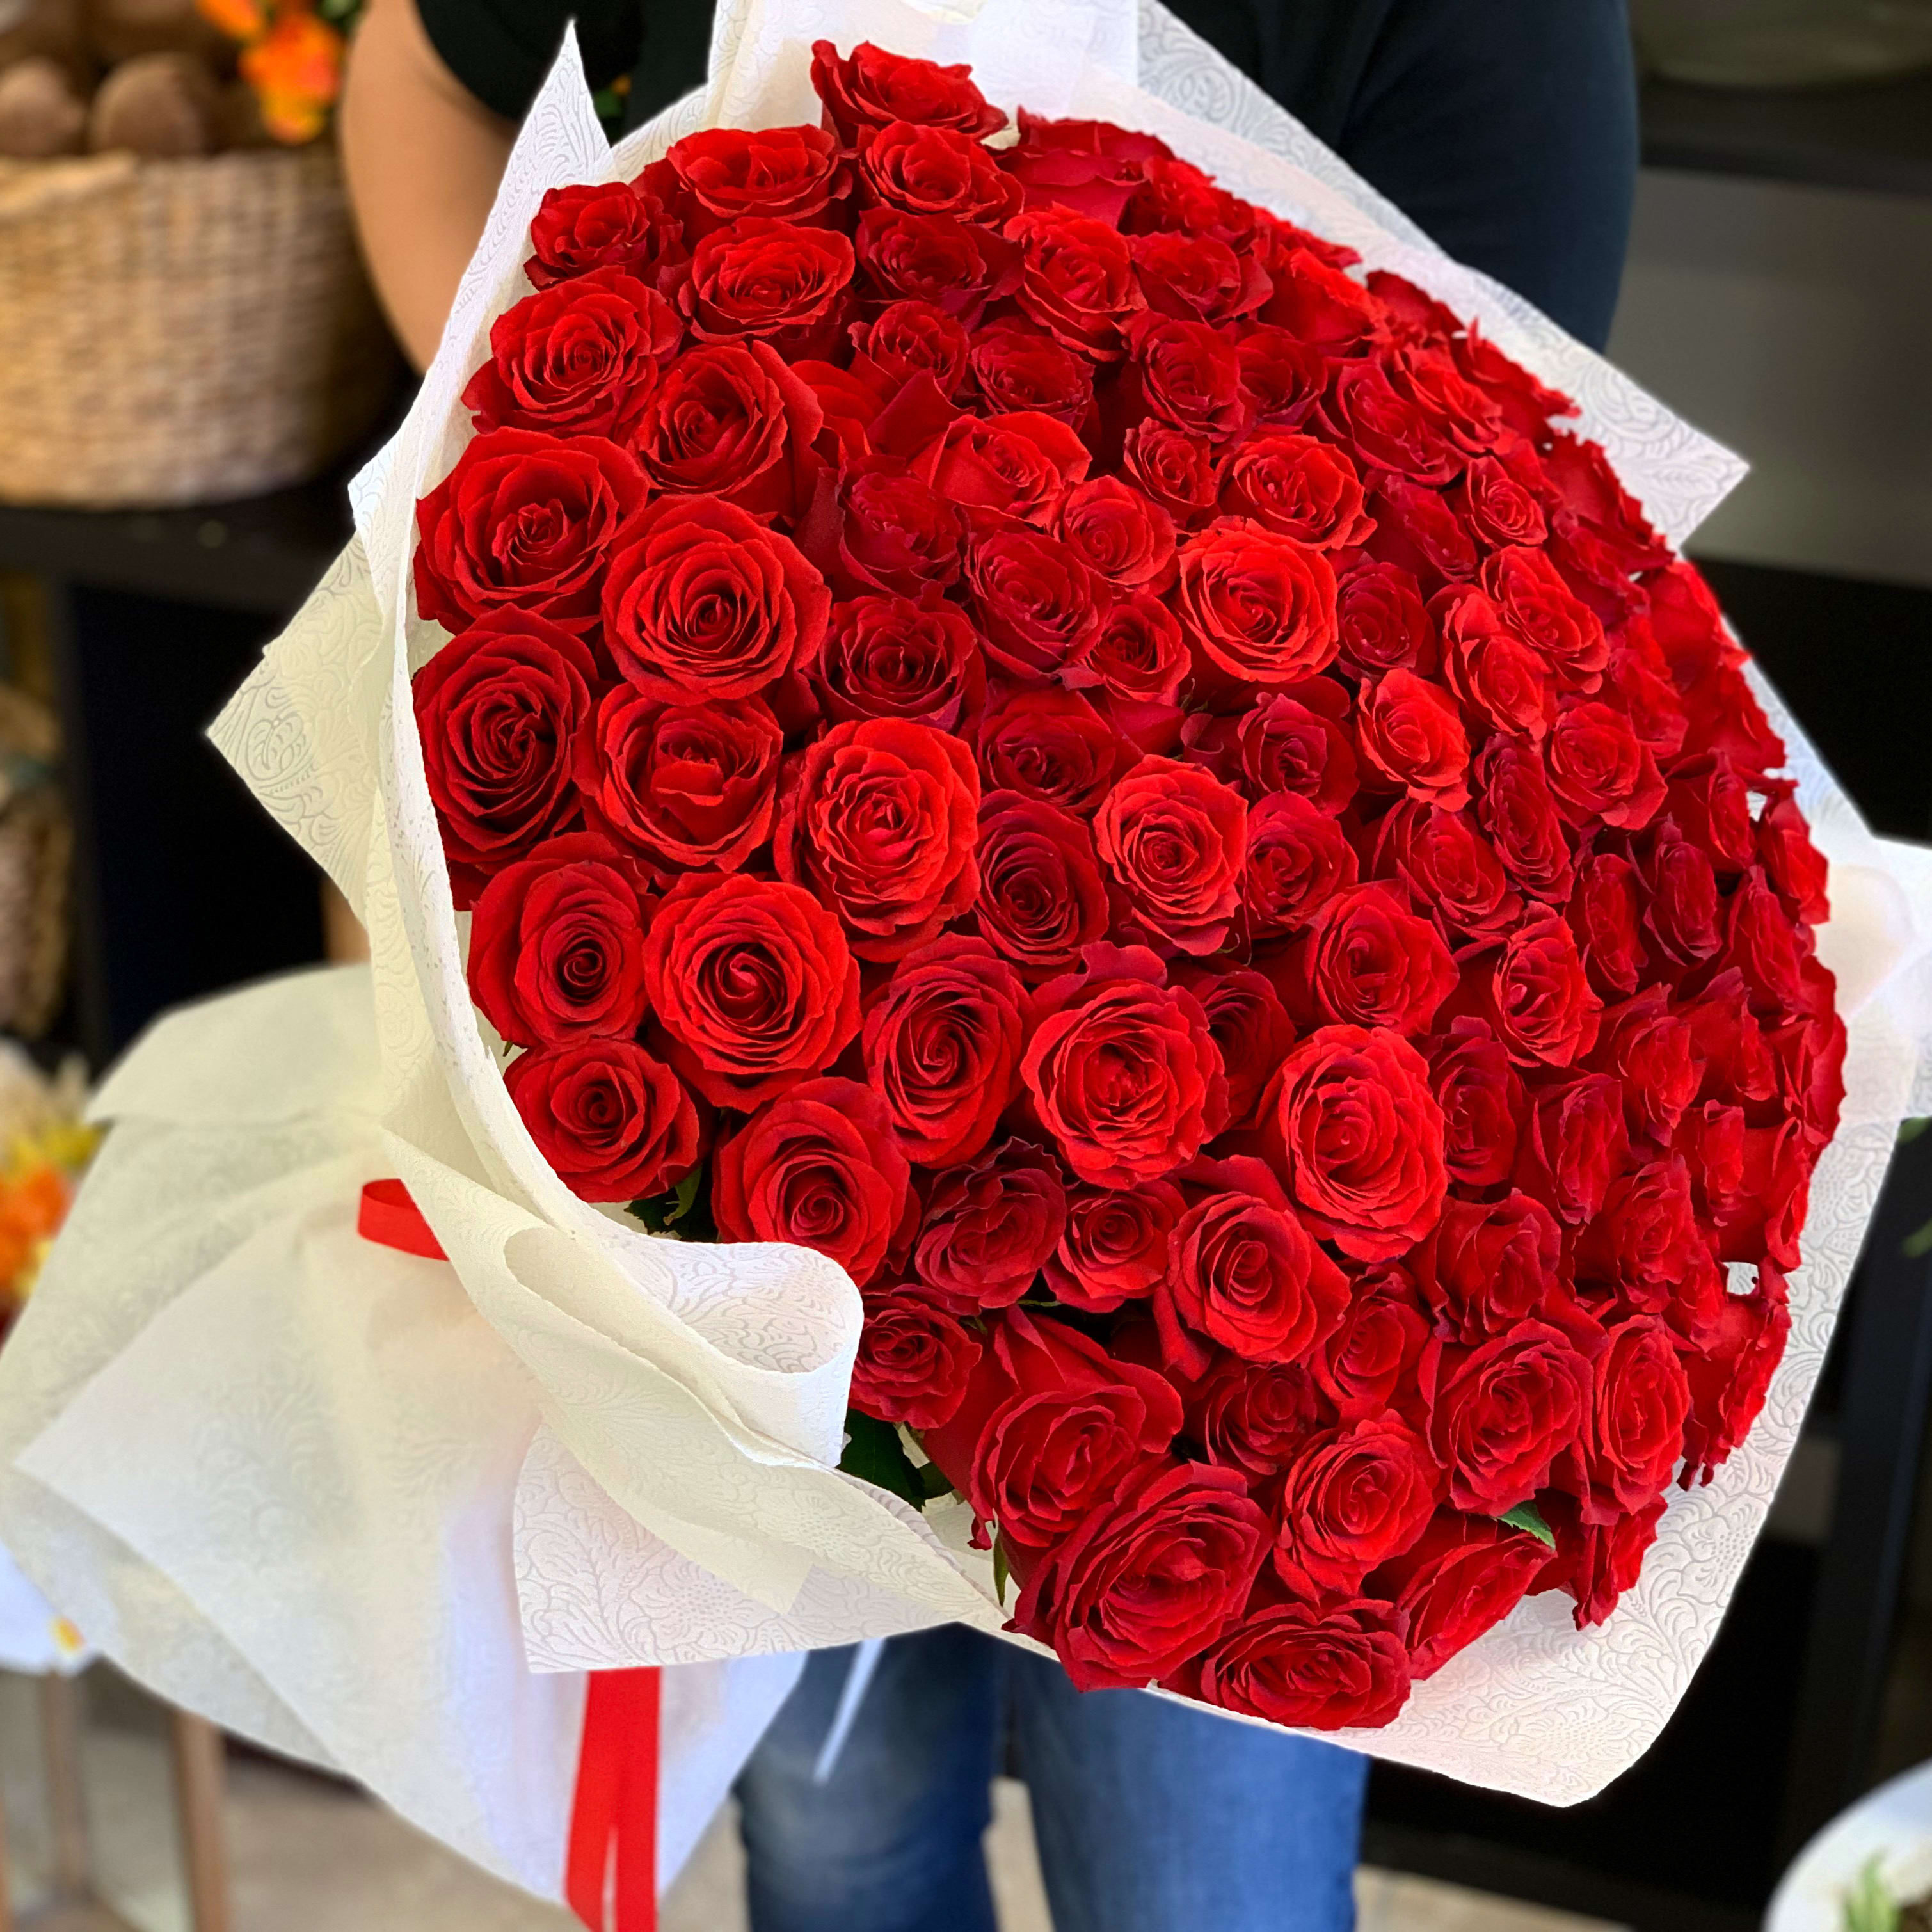 100 Red Roses Hand-crafted Bouquet in Miami Beach, FL